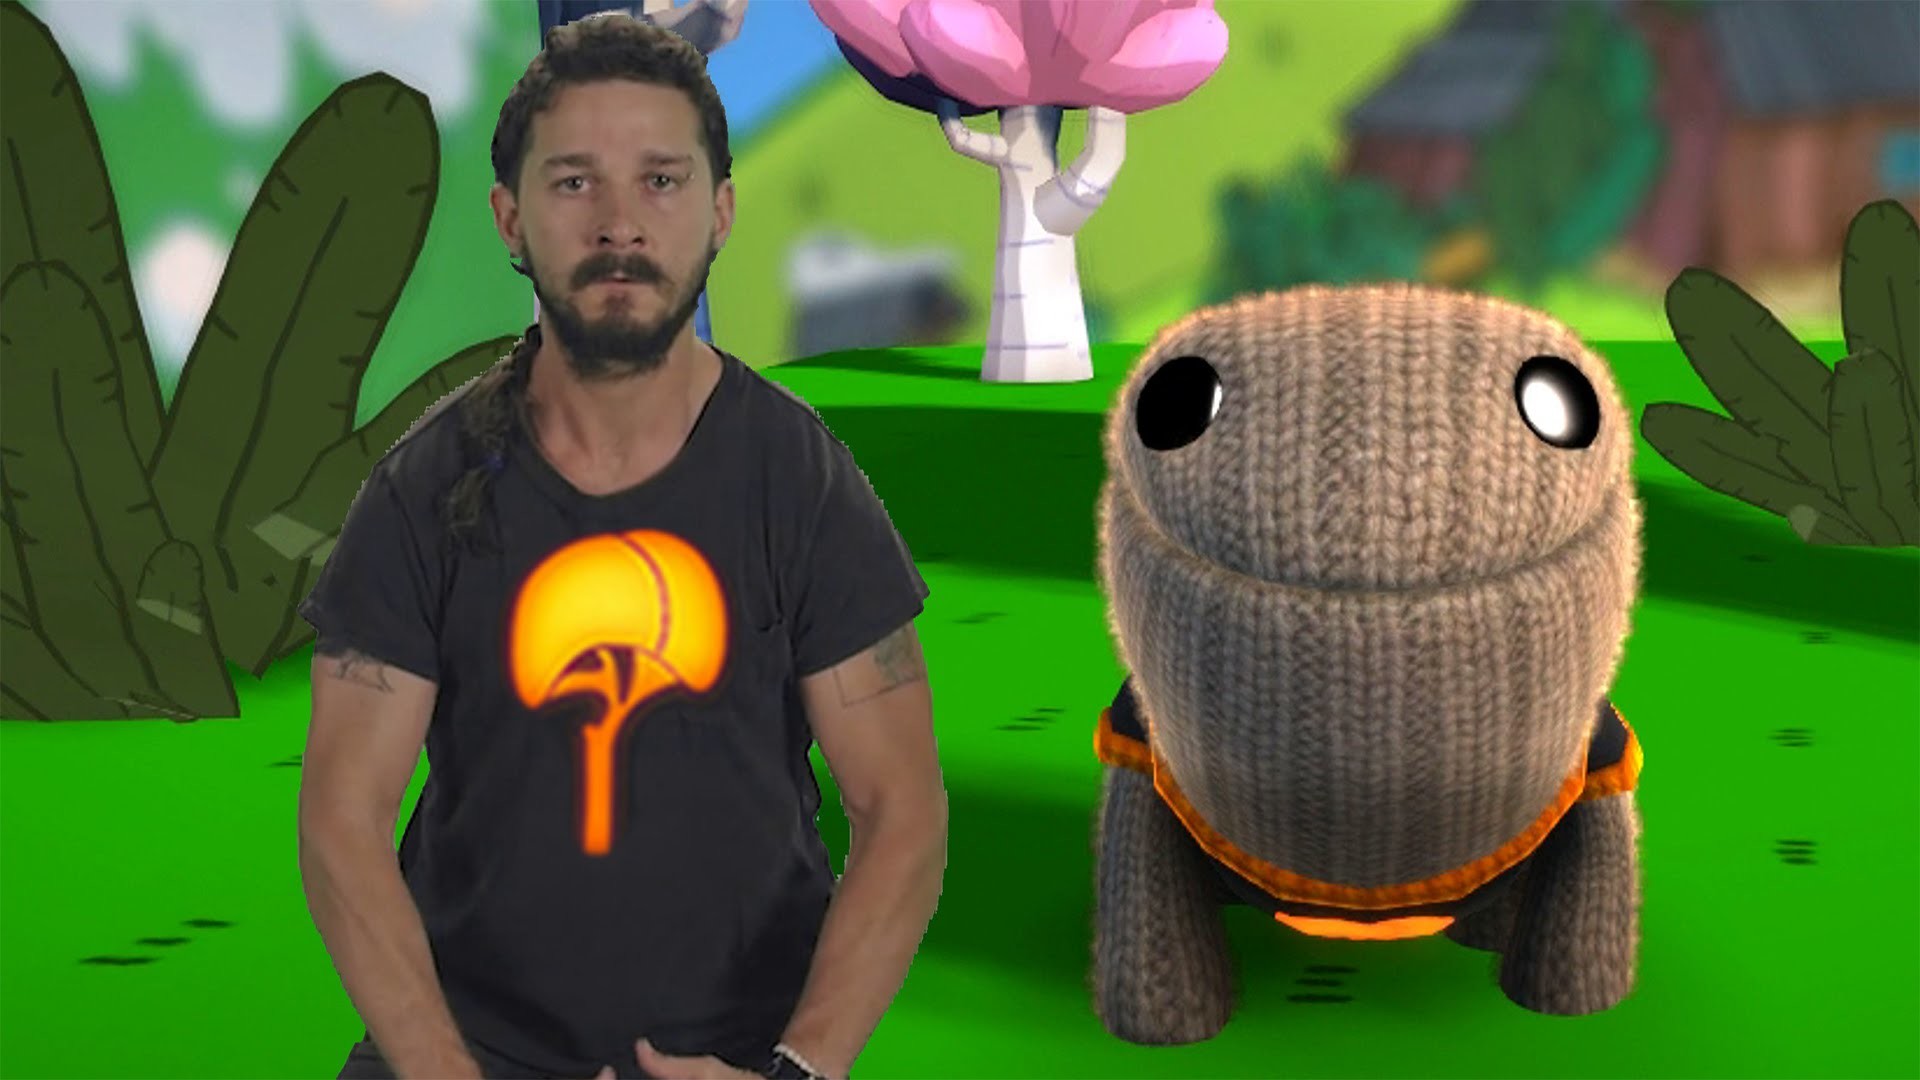 1920x1080 Just Do It - Shia LaBeouf Gives Motivational Speech To OddSock -  LittleBigPlanet 3 Animation - YouTube